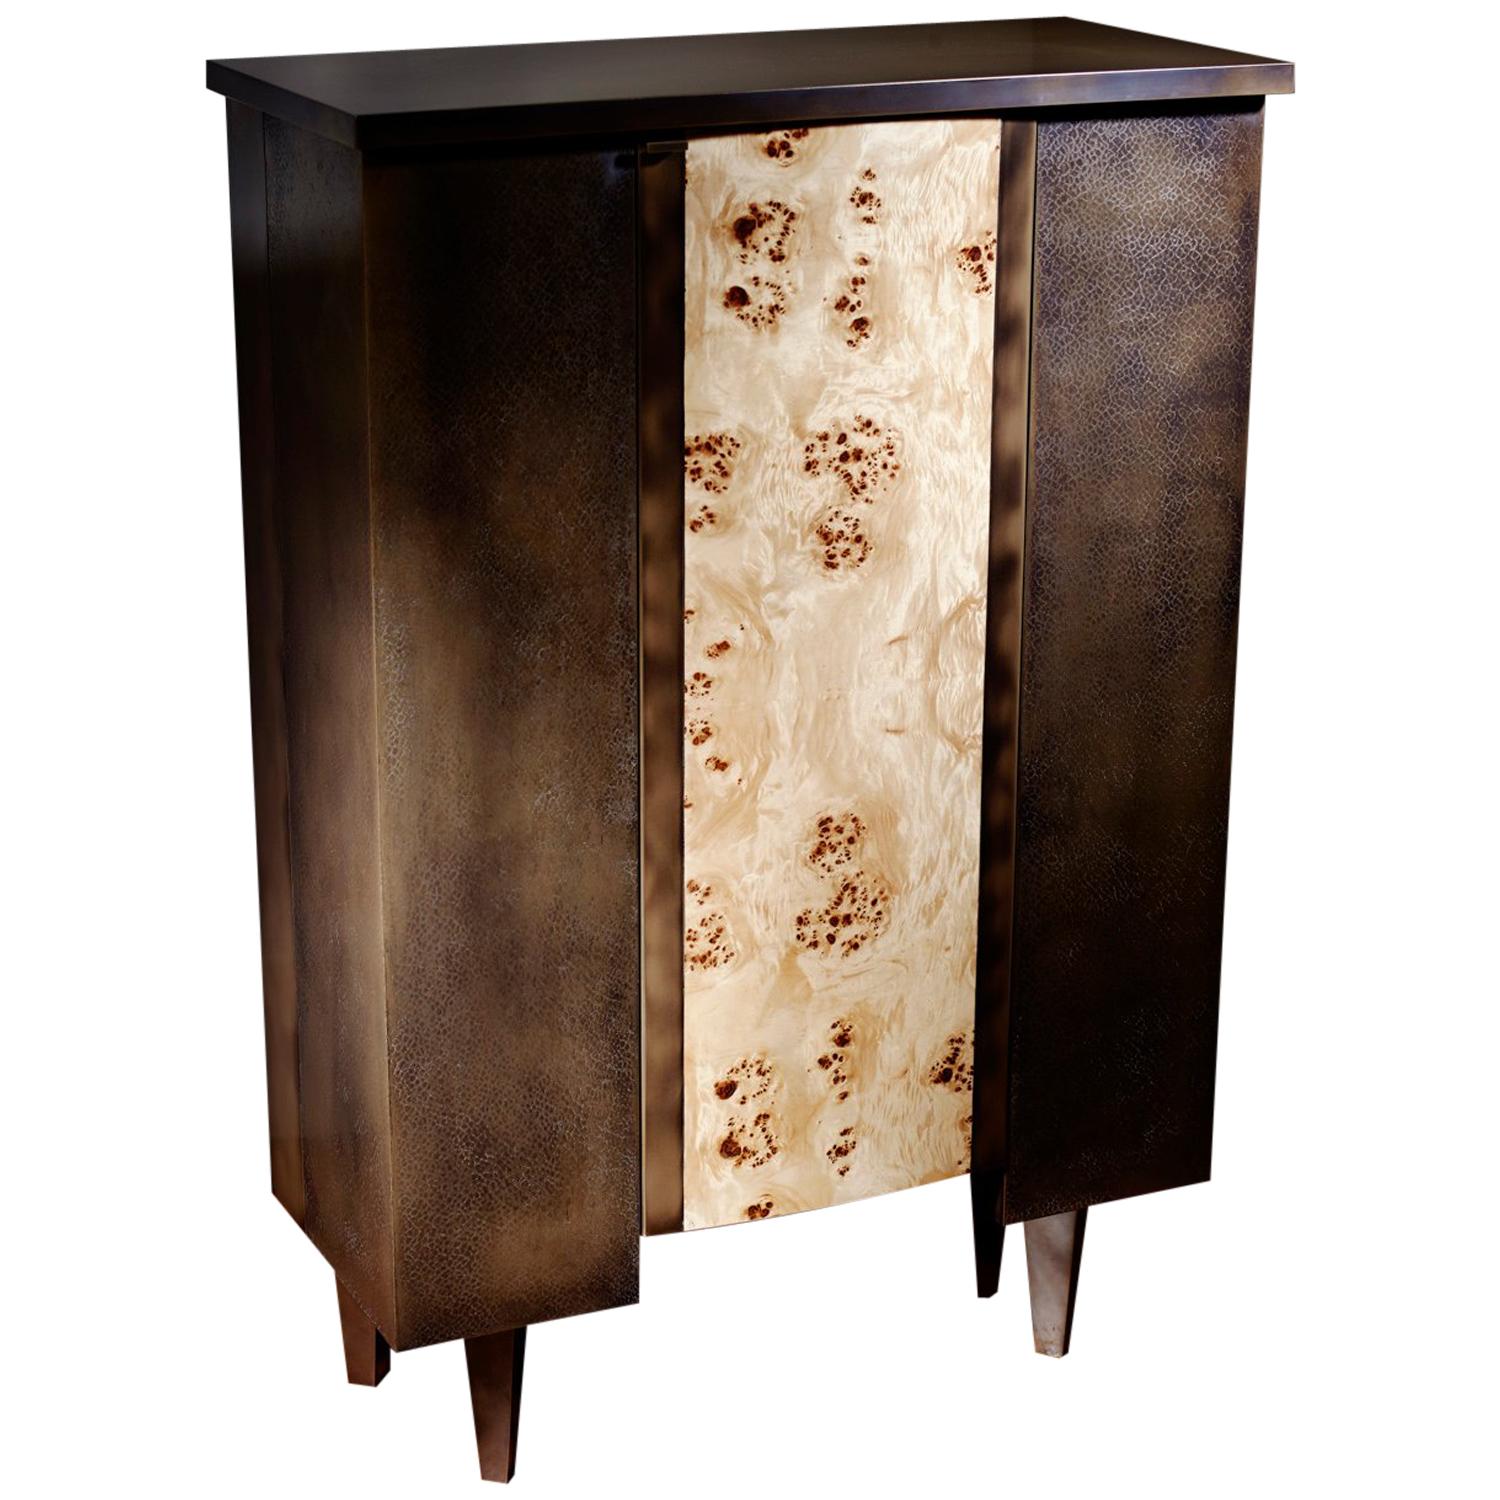 Bronze Sideboard "Résille" ‘Contemporary, Limited Edition’ For Sale